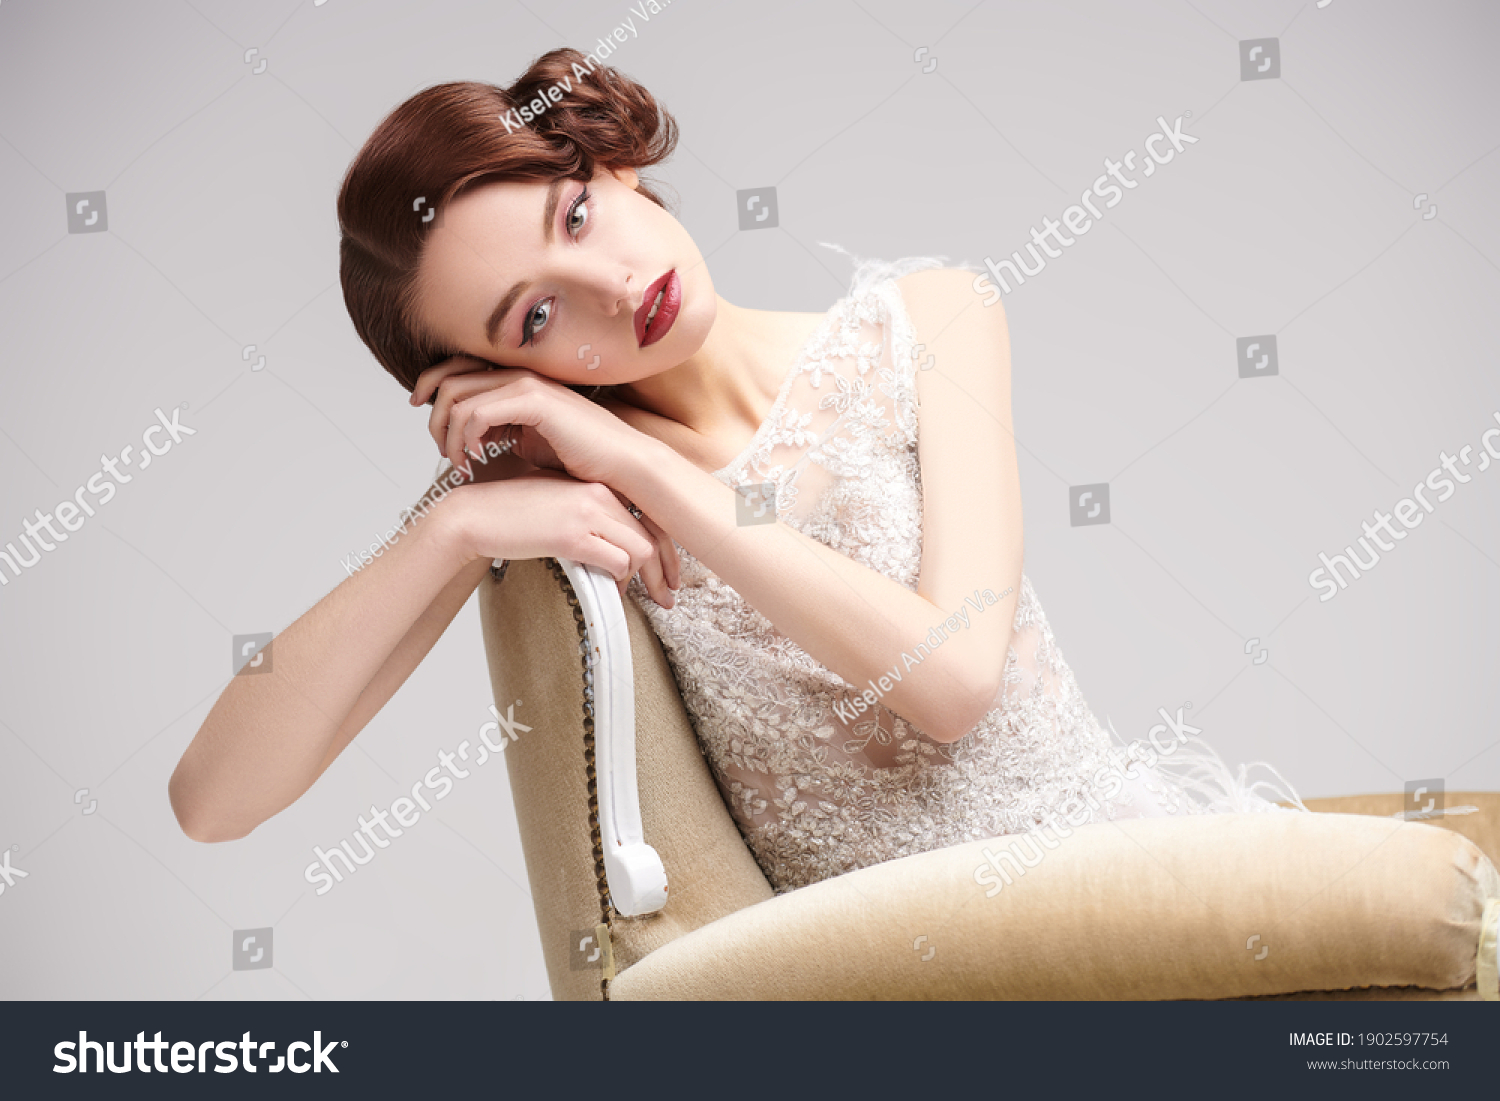 Portrait of a beautiful chic woman posing in a luxury white dress in vintage armchair. Evening makeup and hairstyle of the 20s.  #1902597754